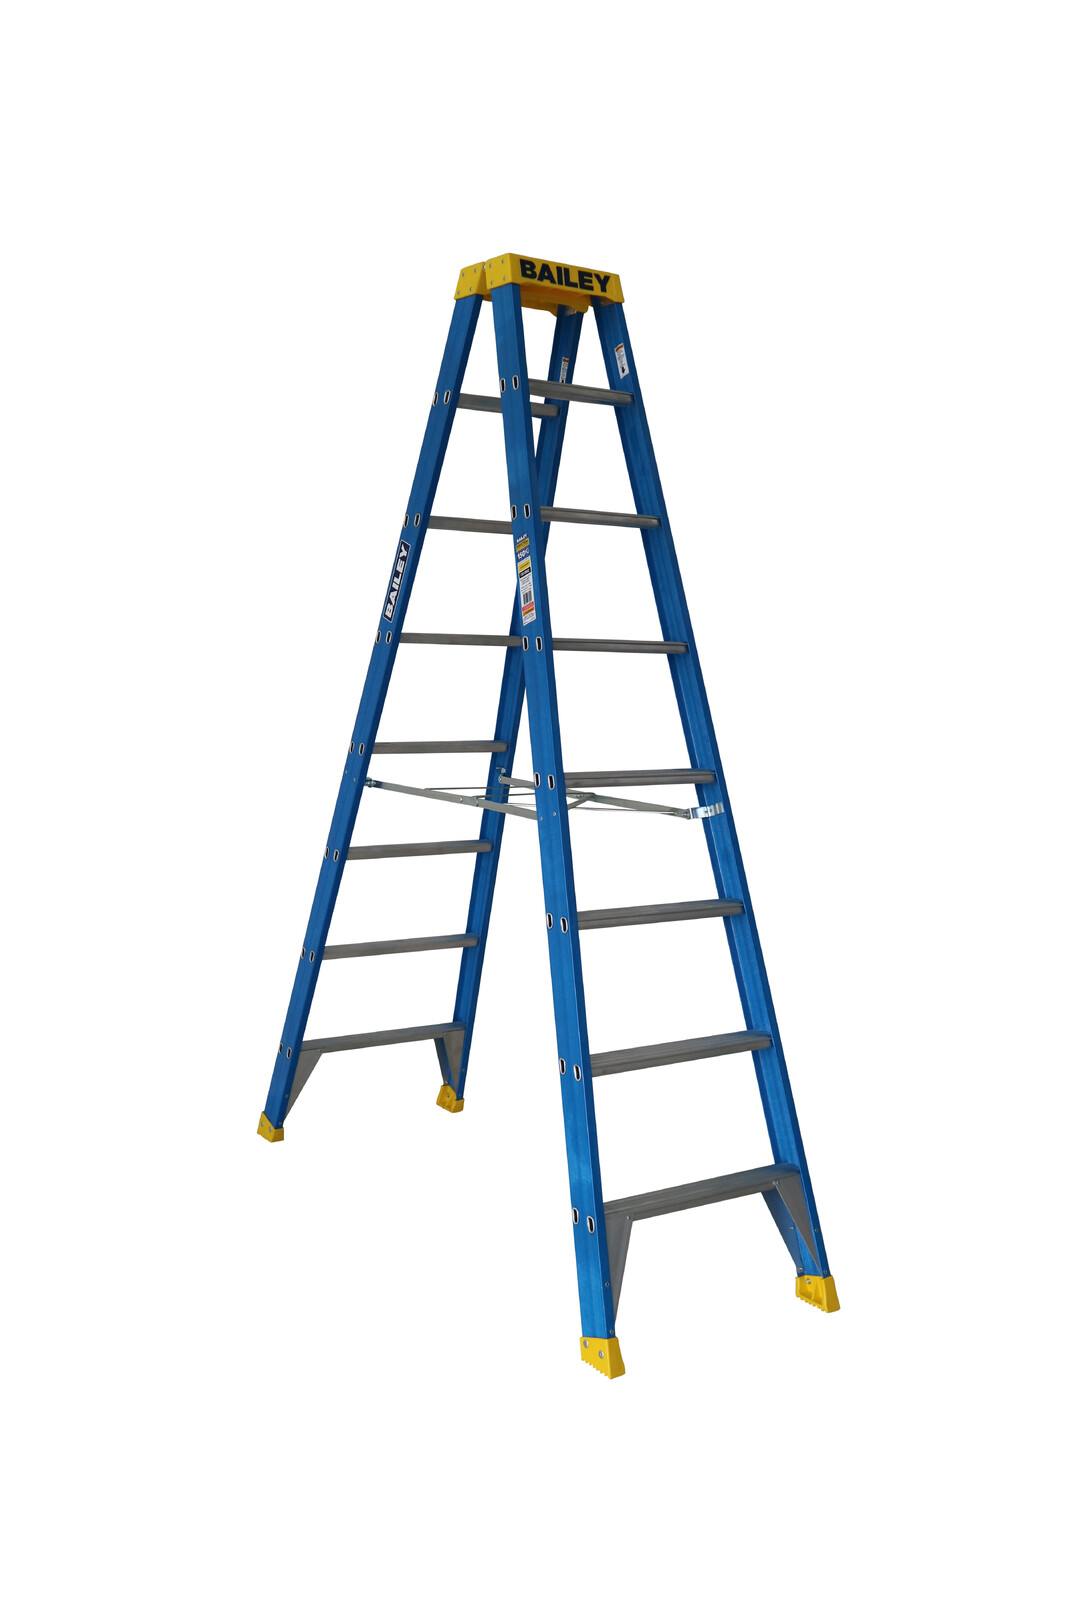 Bailey 150kg Rated 8 Step RFDS Fibreglass Double Sided Ladder